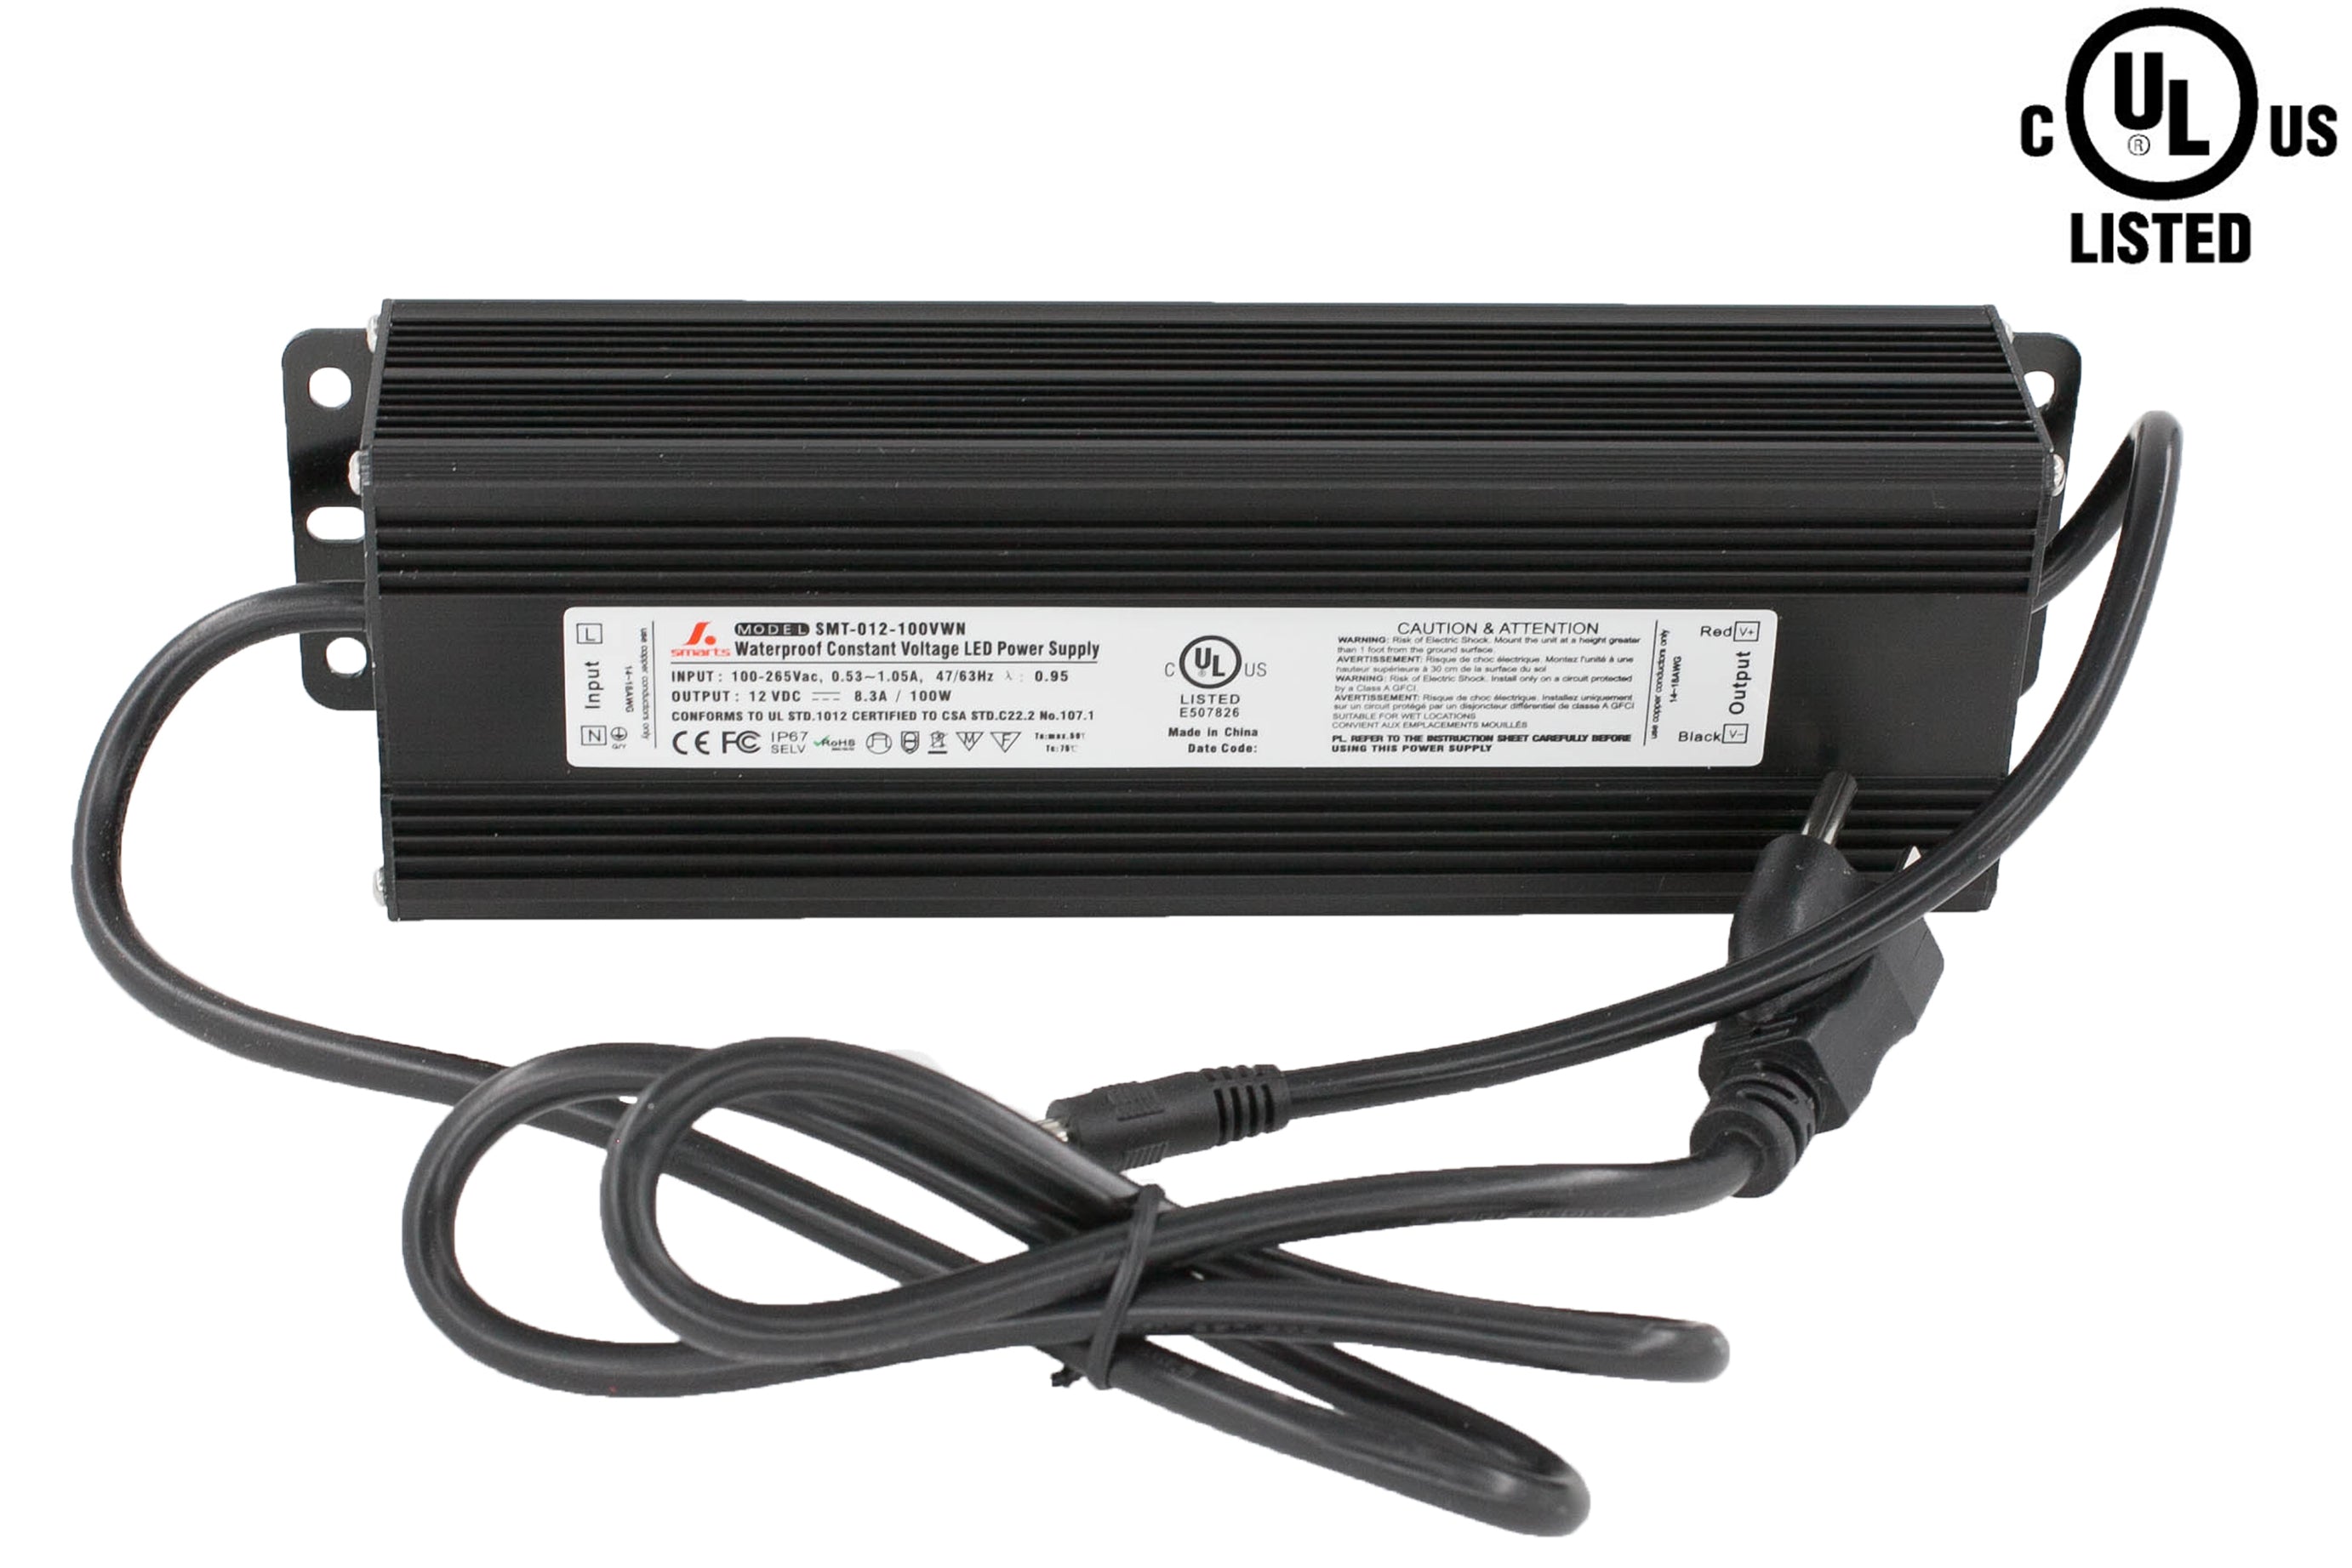 UL Listed 12v 8.3 Amps 100w Constant Voltage waterproof Power